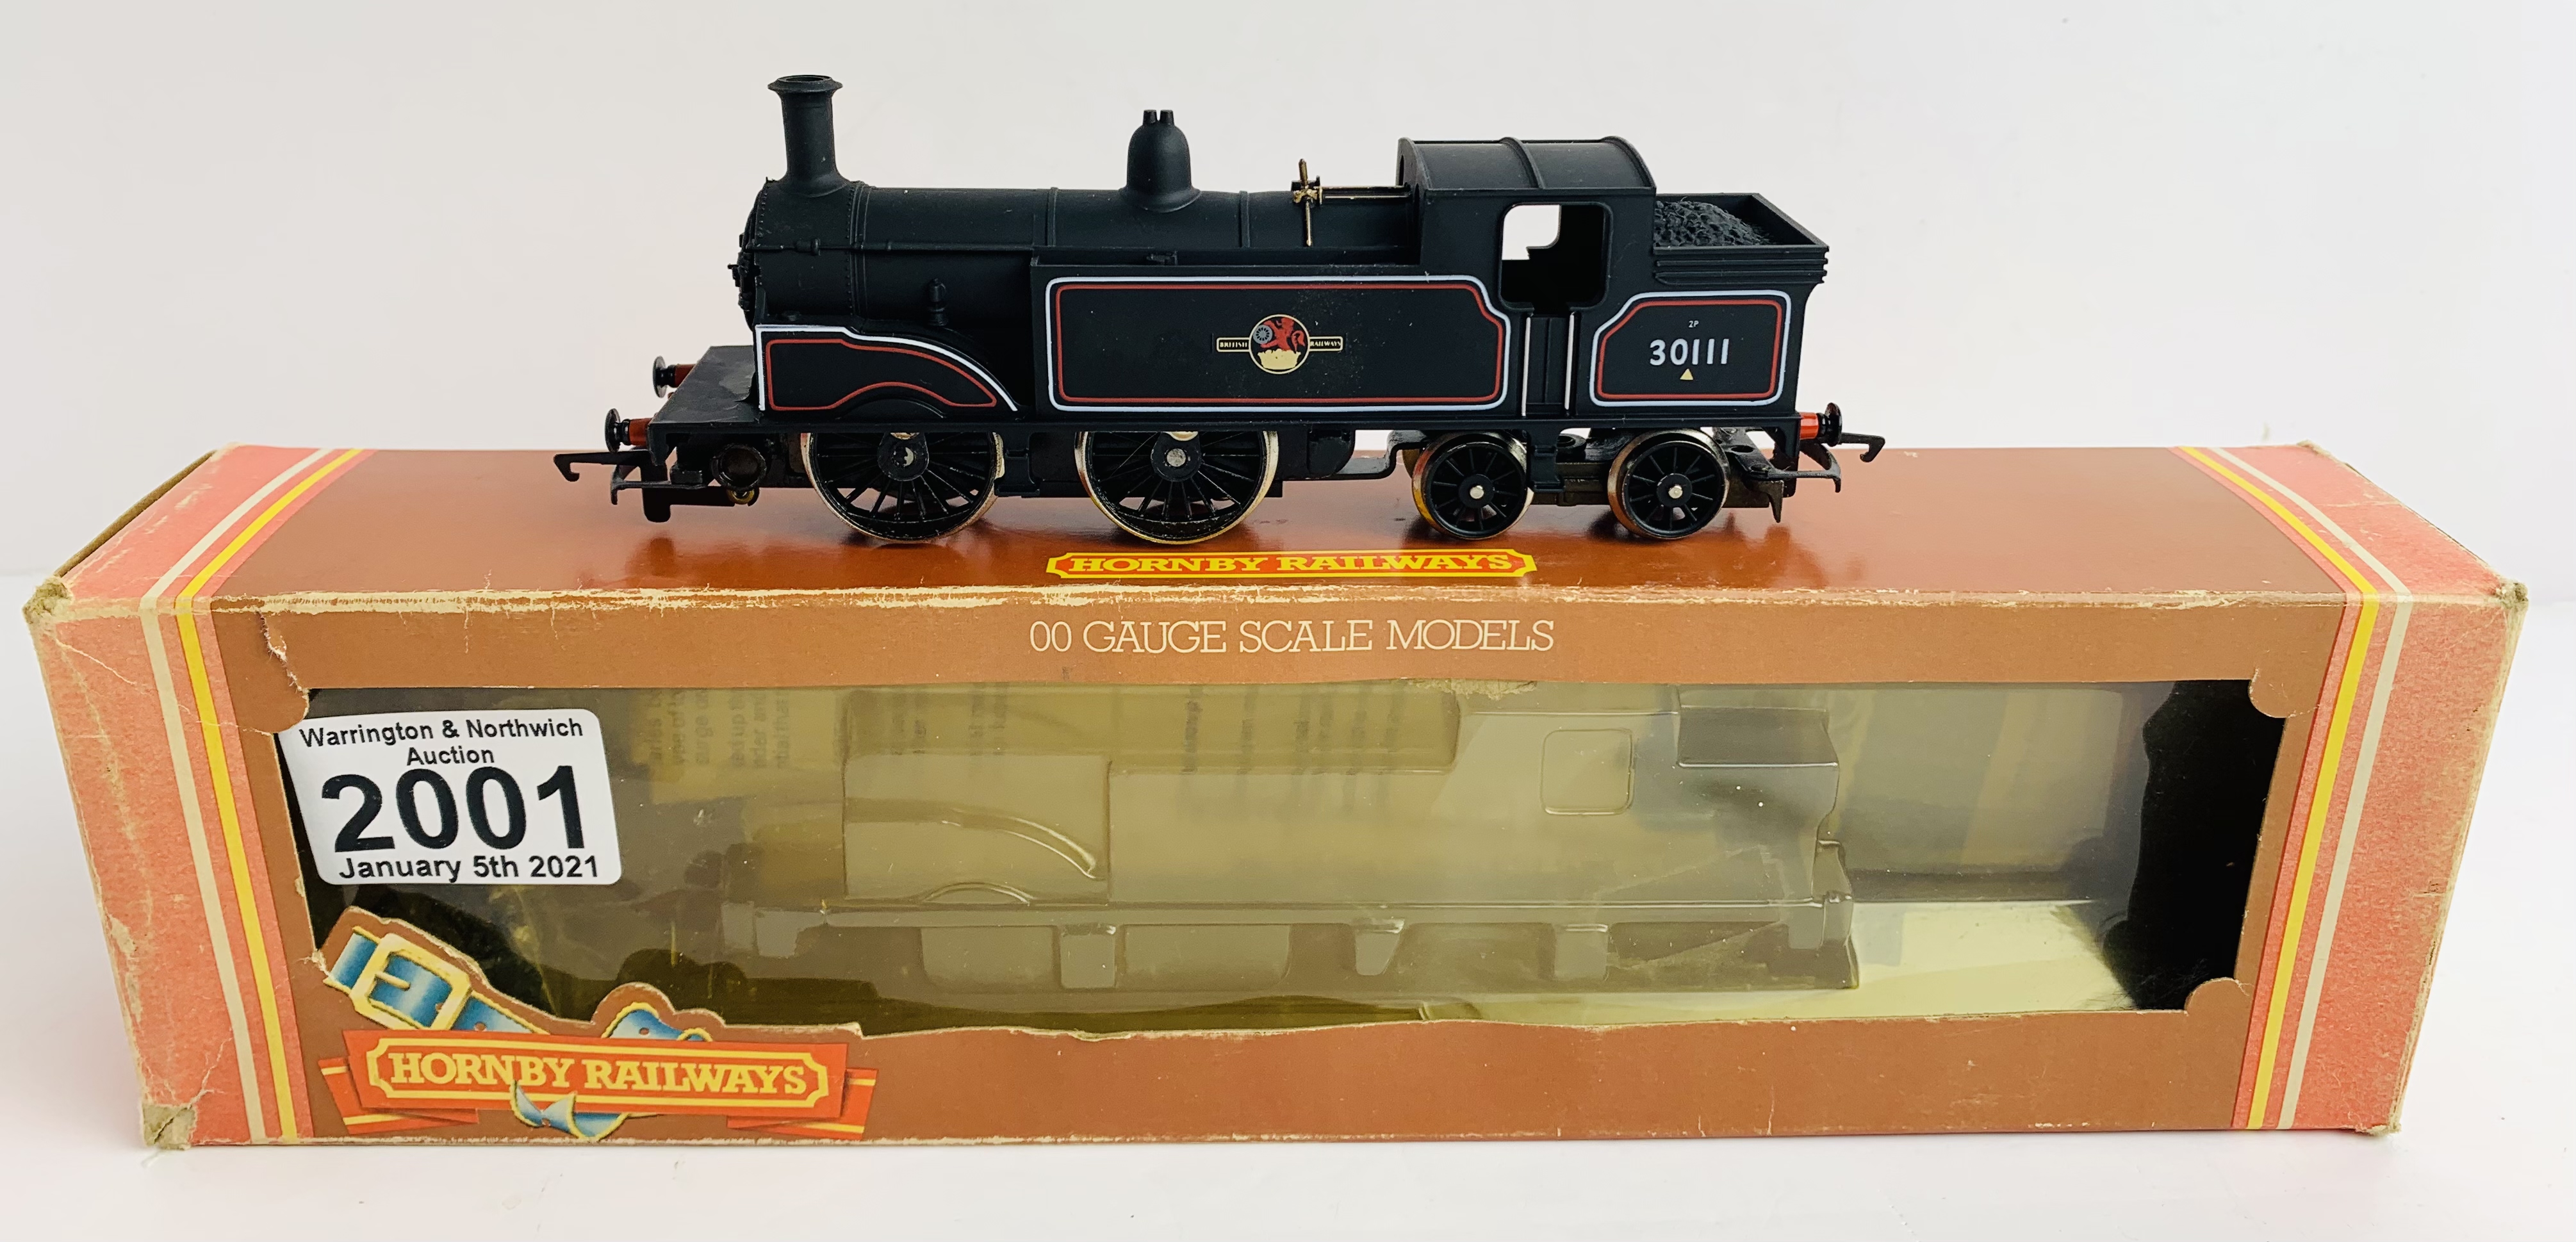 Hornby OO Gauge Class M7 Locomotive Boxed P&P Group 1 (£14+VAT for the first lot and £1+VAT for